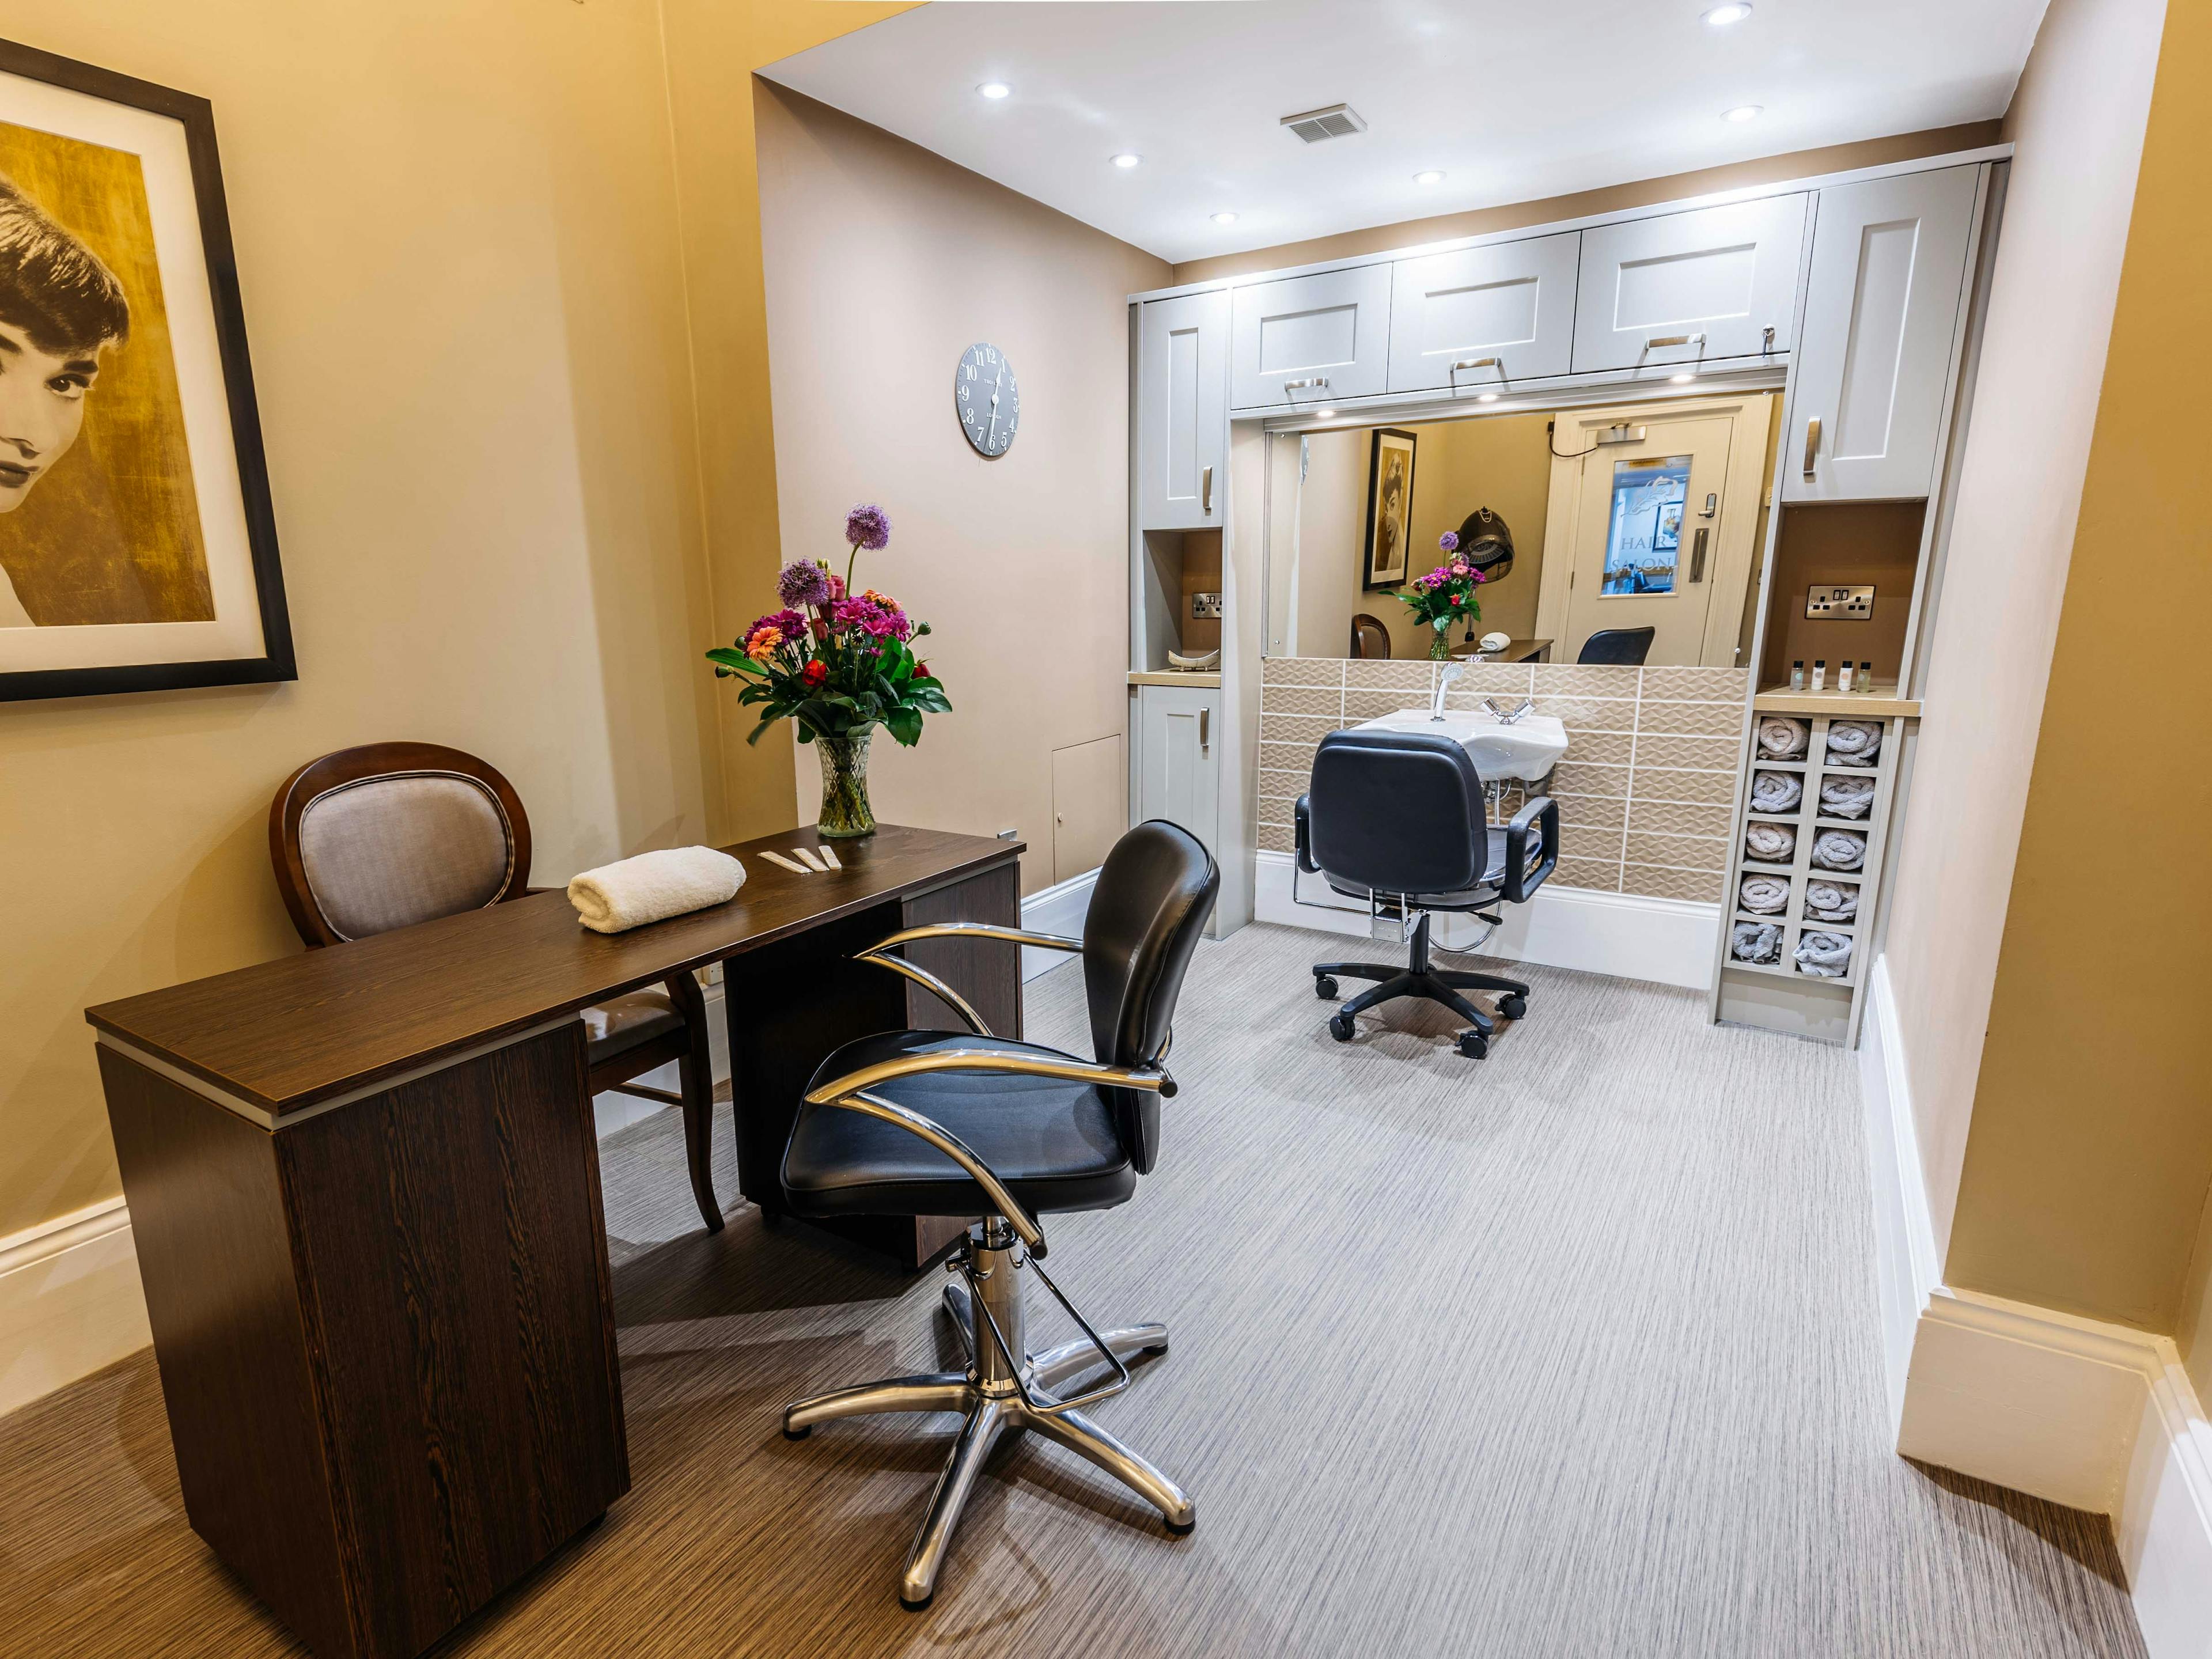 Salon at Lawton Manor Care Home in Kidsgrove, Newcastle-under-Lyme